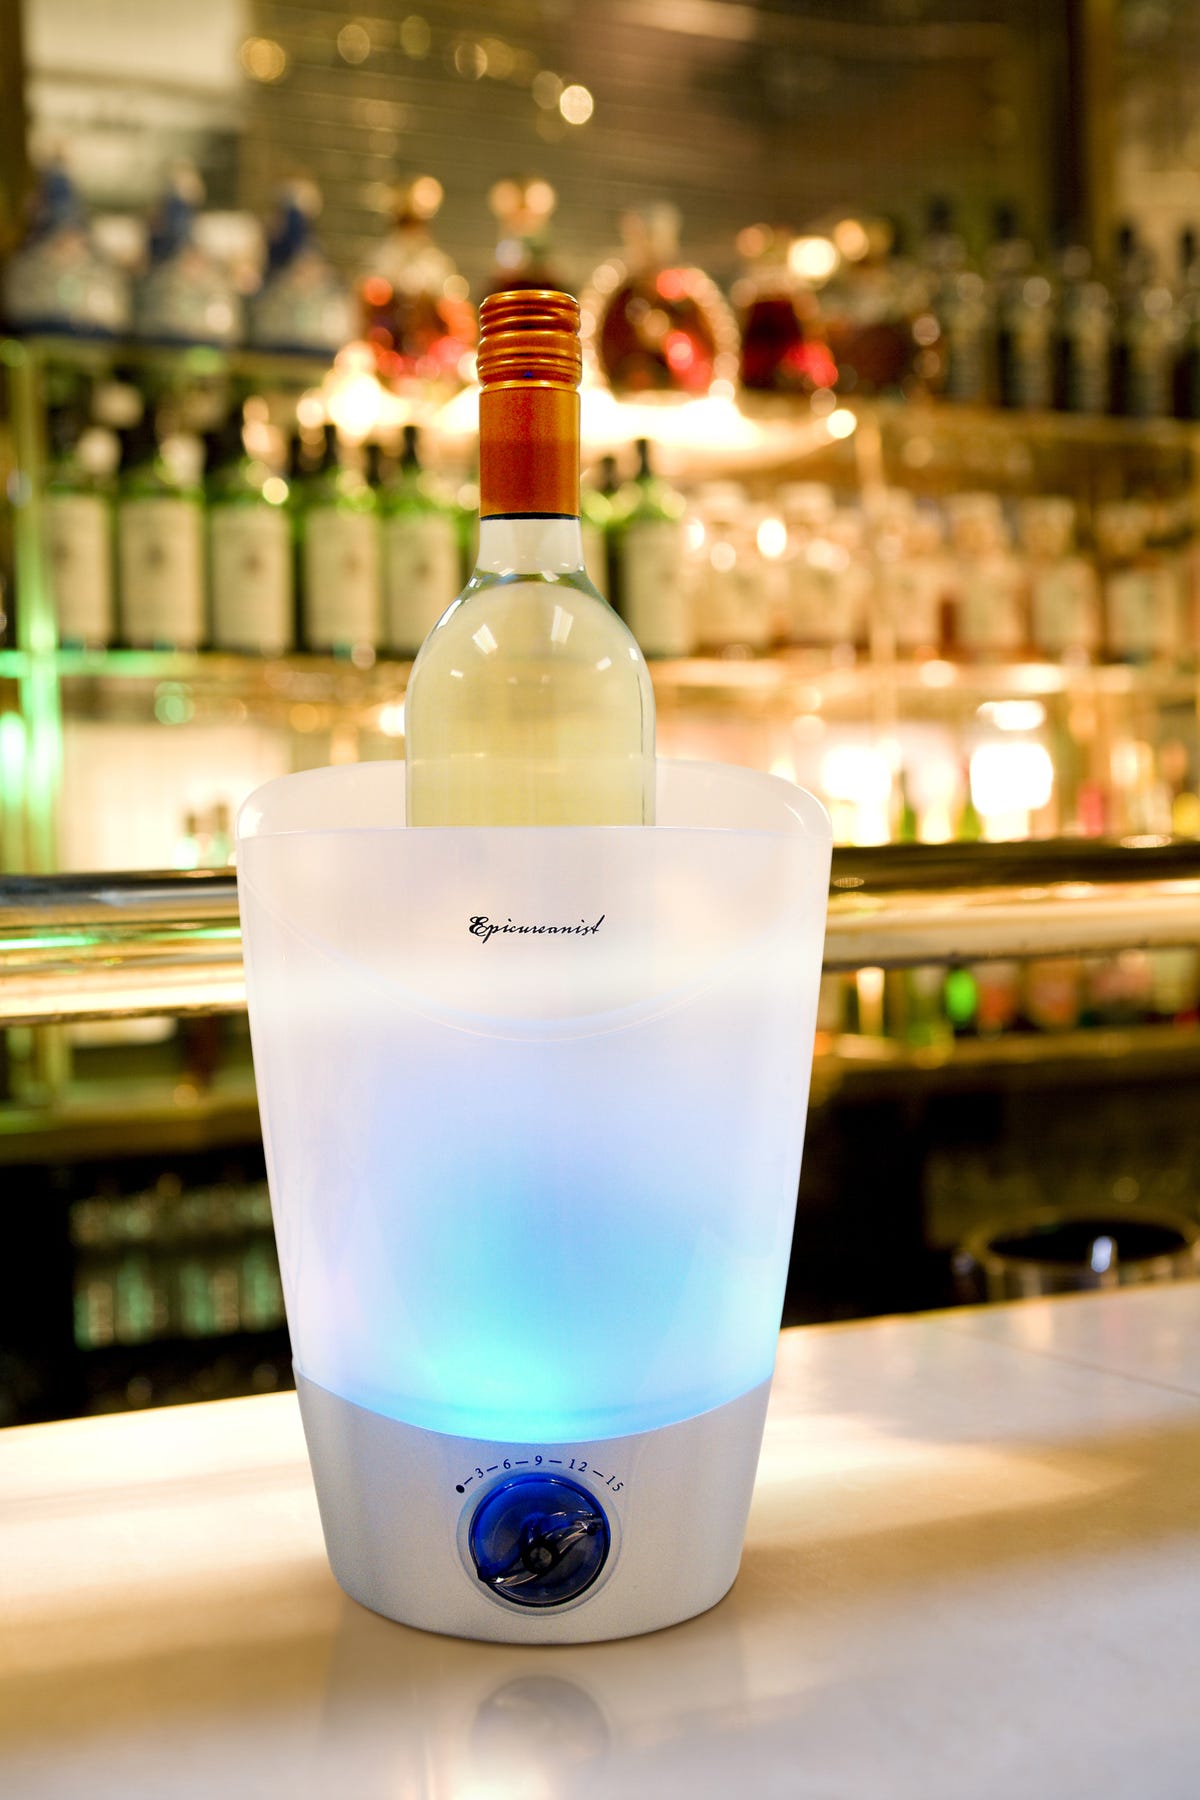 Chill out and watch the show with the Vinotemp Epicureanist Quick Chill Ice Bucket.